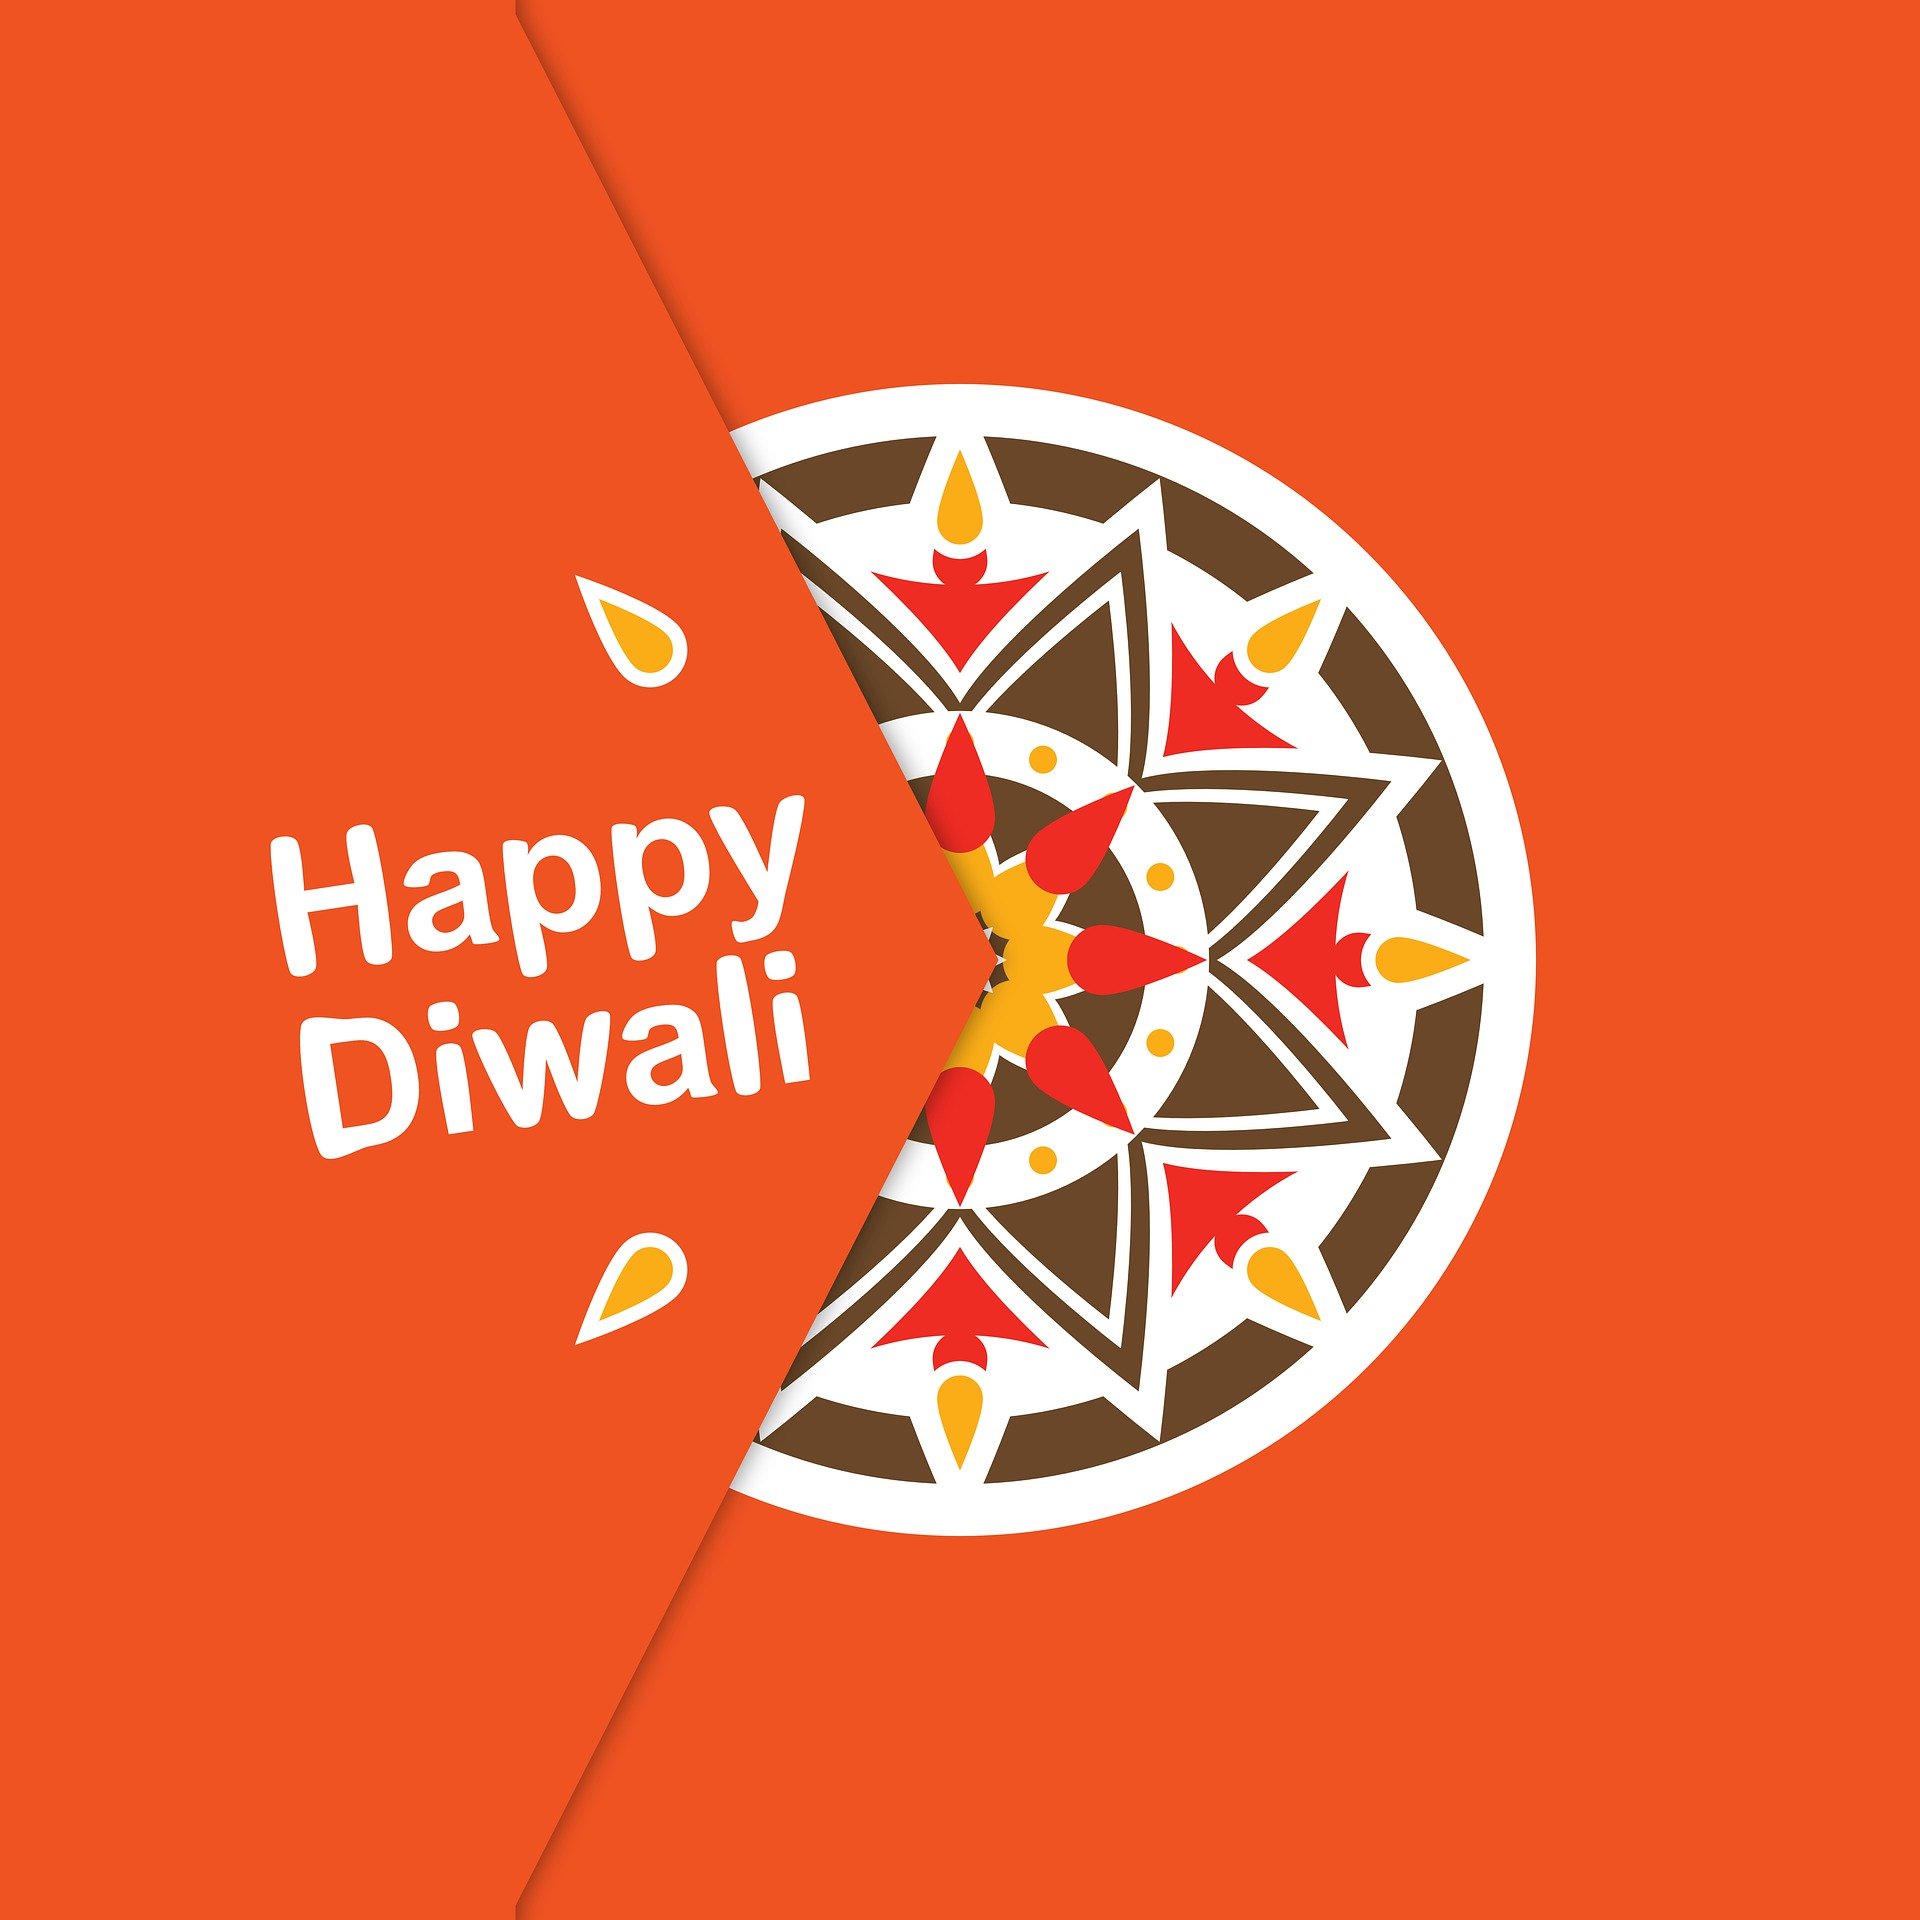 Happy Diwali Wishes, Quotes, and Messages